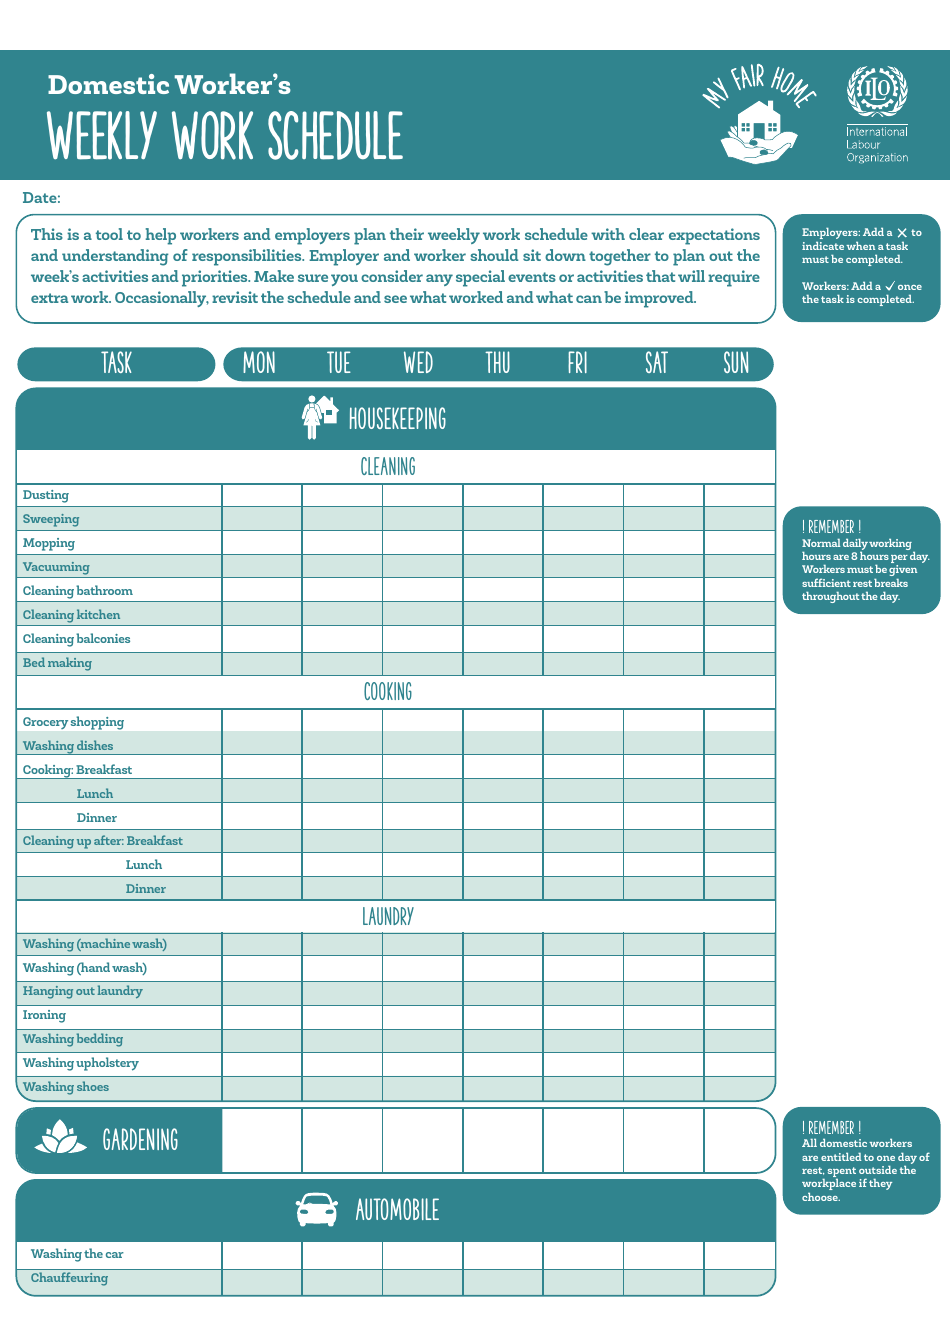 Domestic Worker's Weekly Work Schedule Template - My Fair Home, Page 1